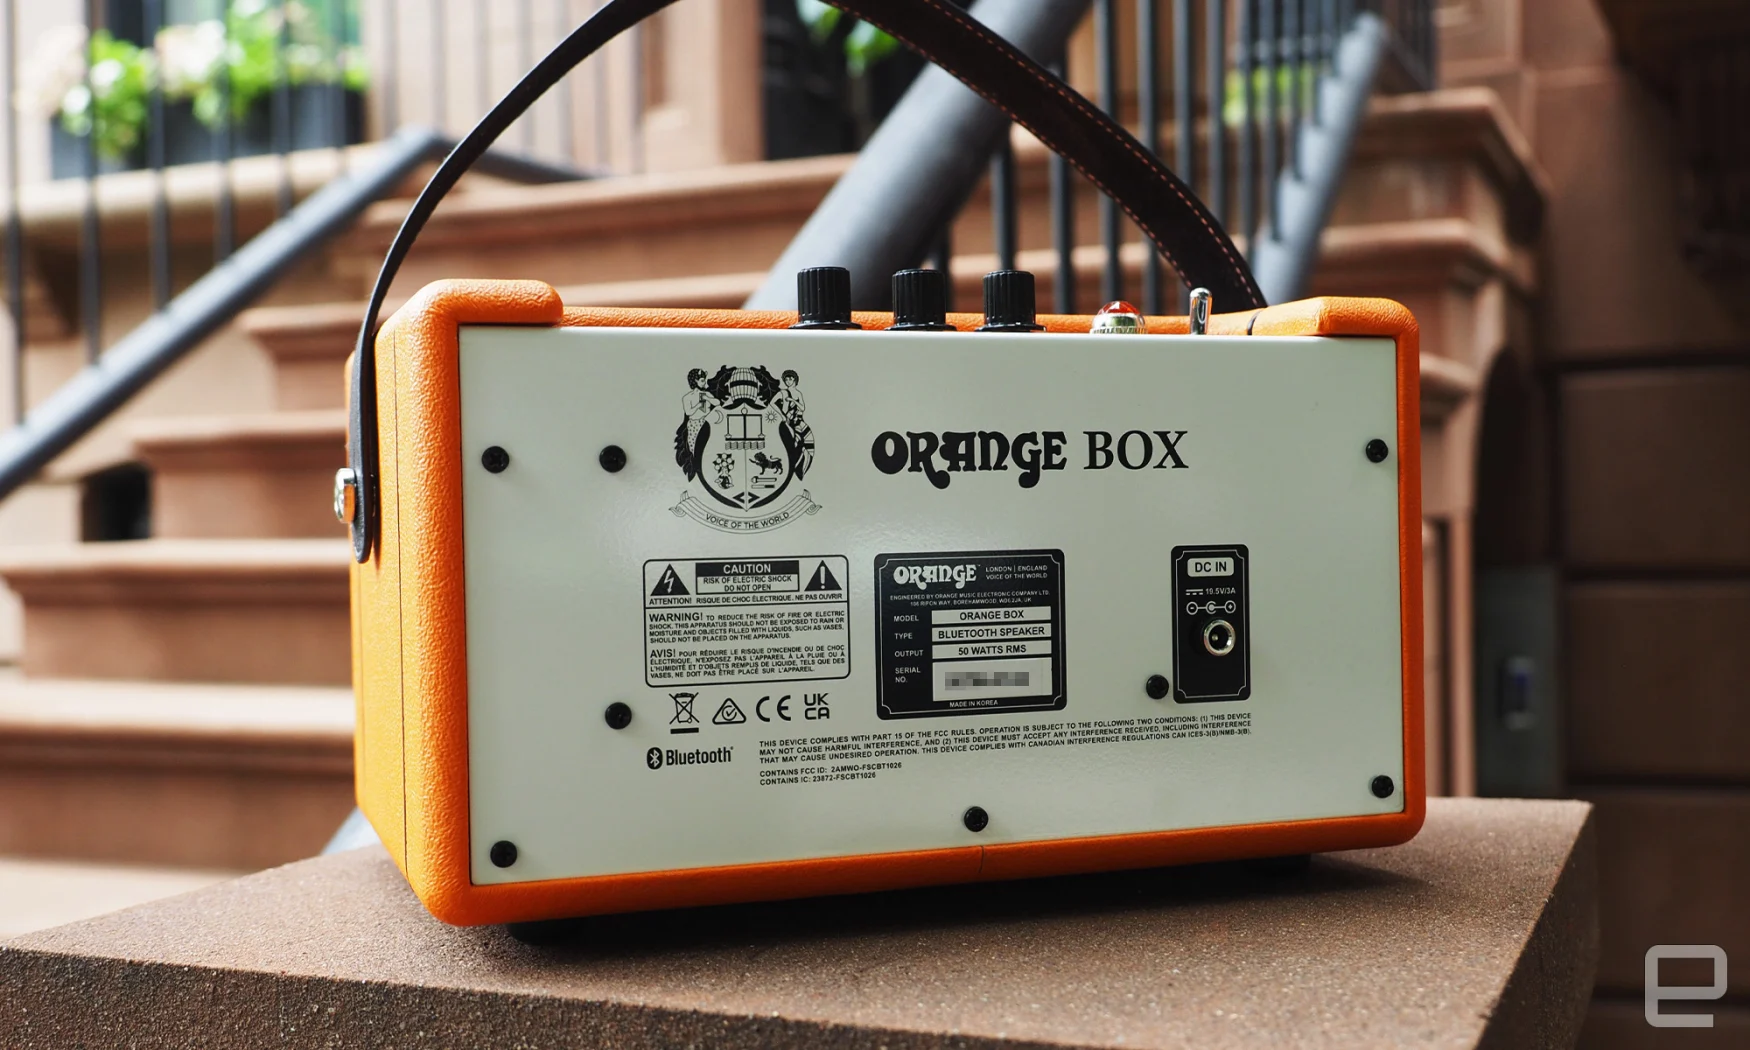 The Orange Amps - Orange Box Bluetooth speaker seen on the stoop of a brownstone, showing the rear panel.